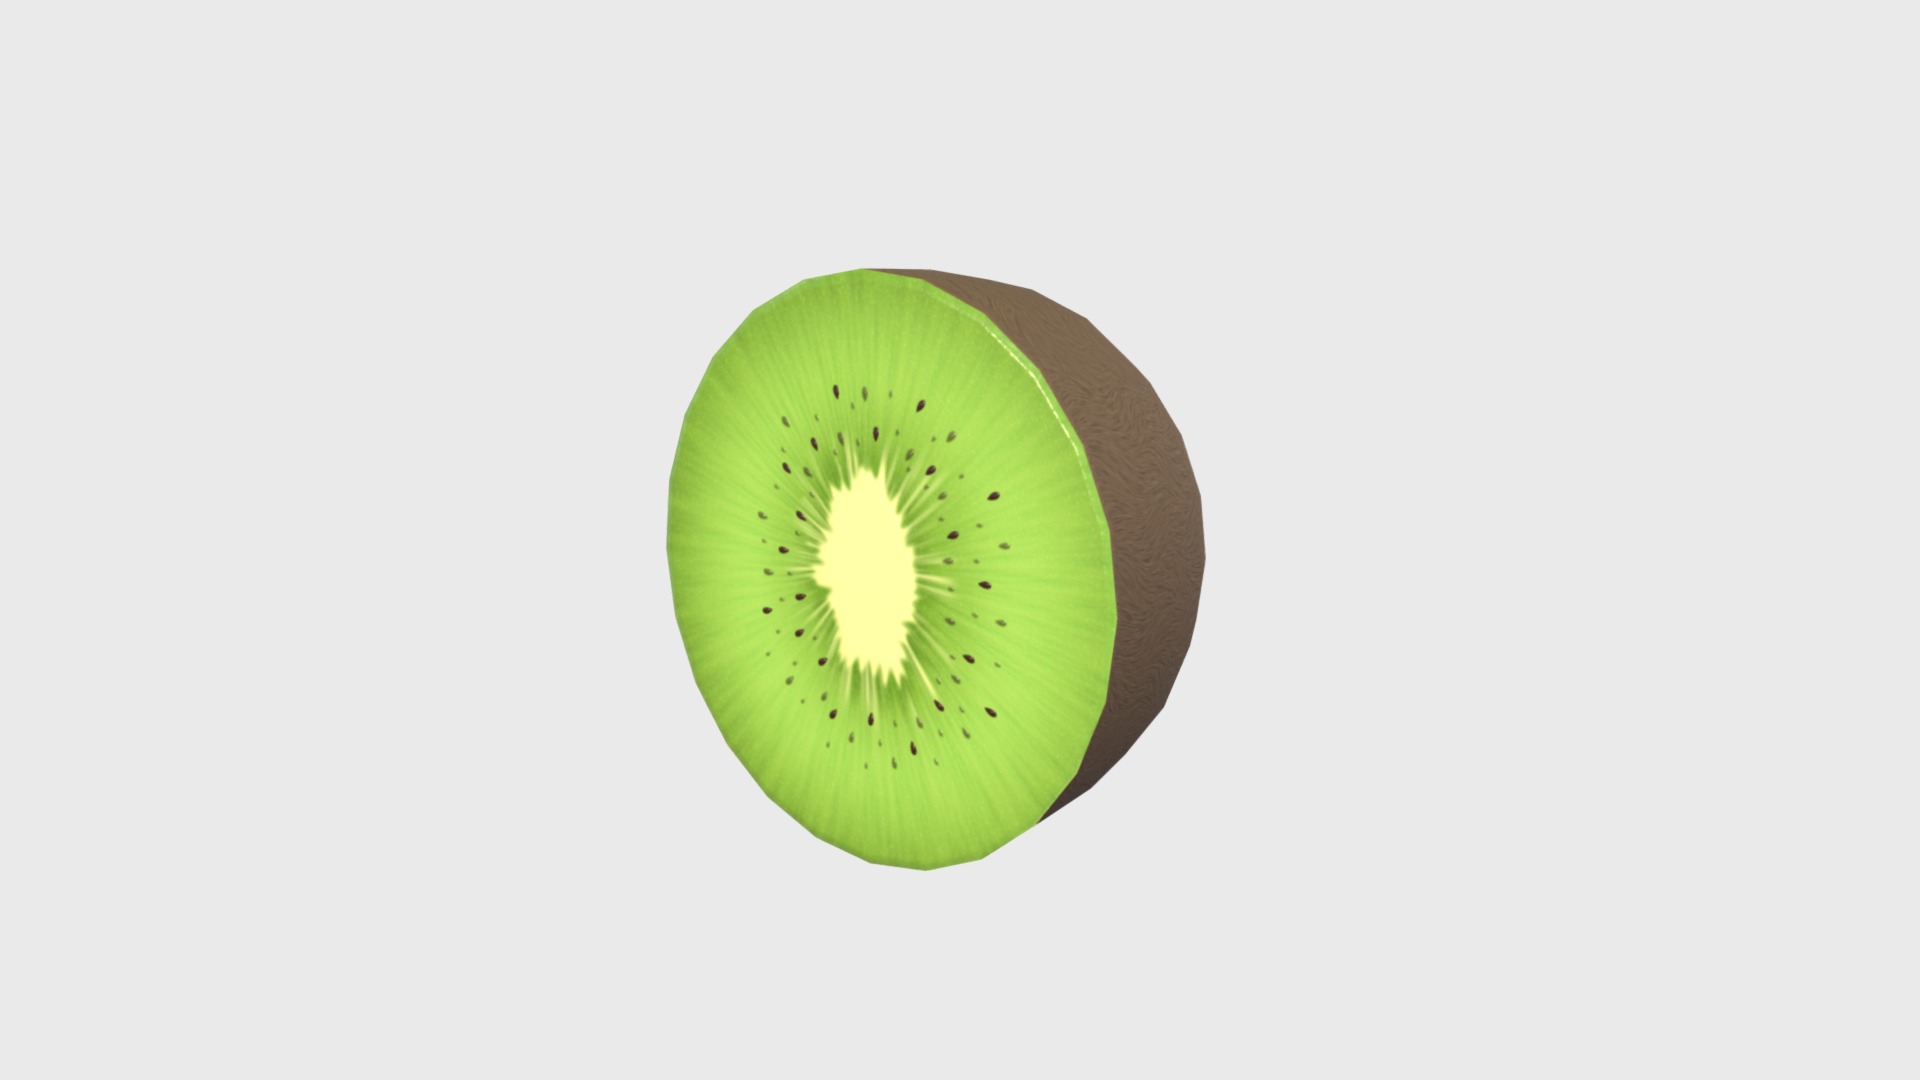 3D model Kiwi - This is a 3D model of the Kiwi. The 3D model is about a green circle with a yellow center.